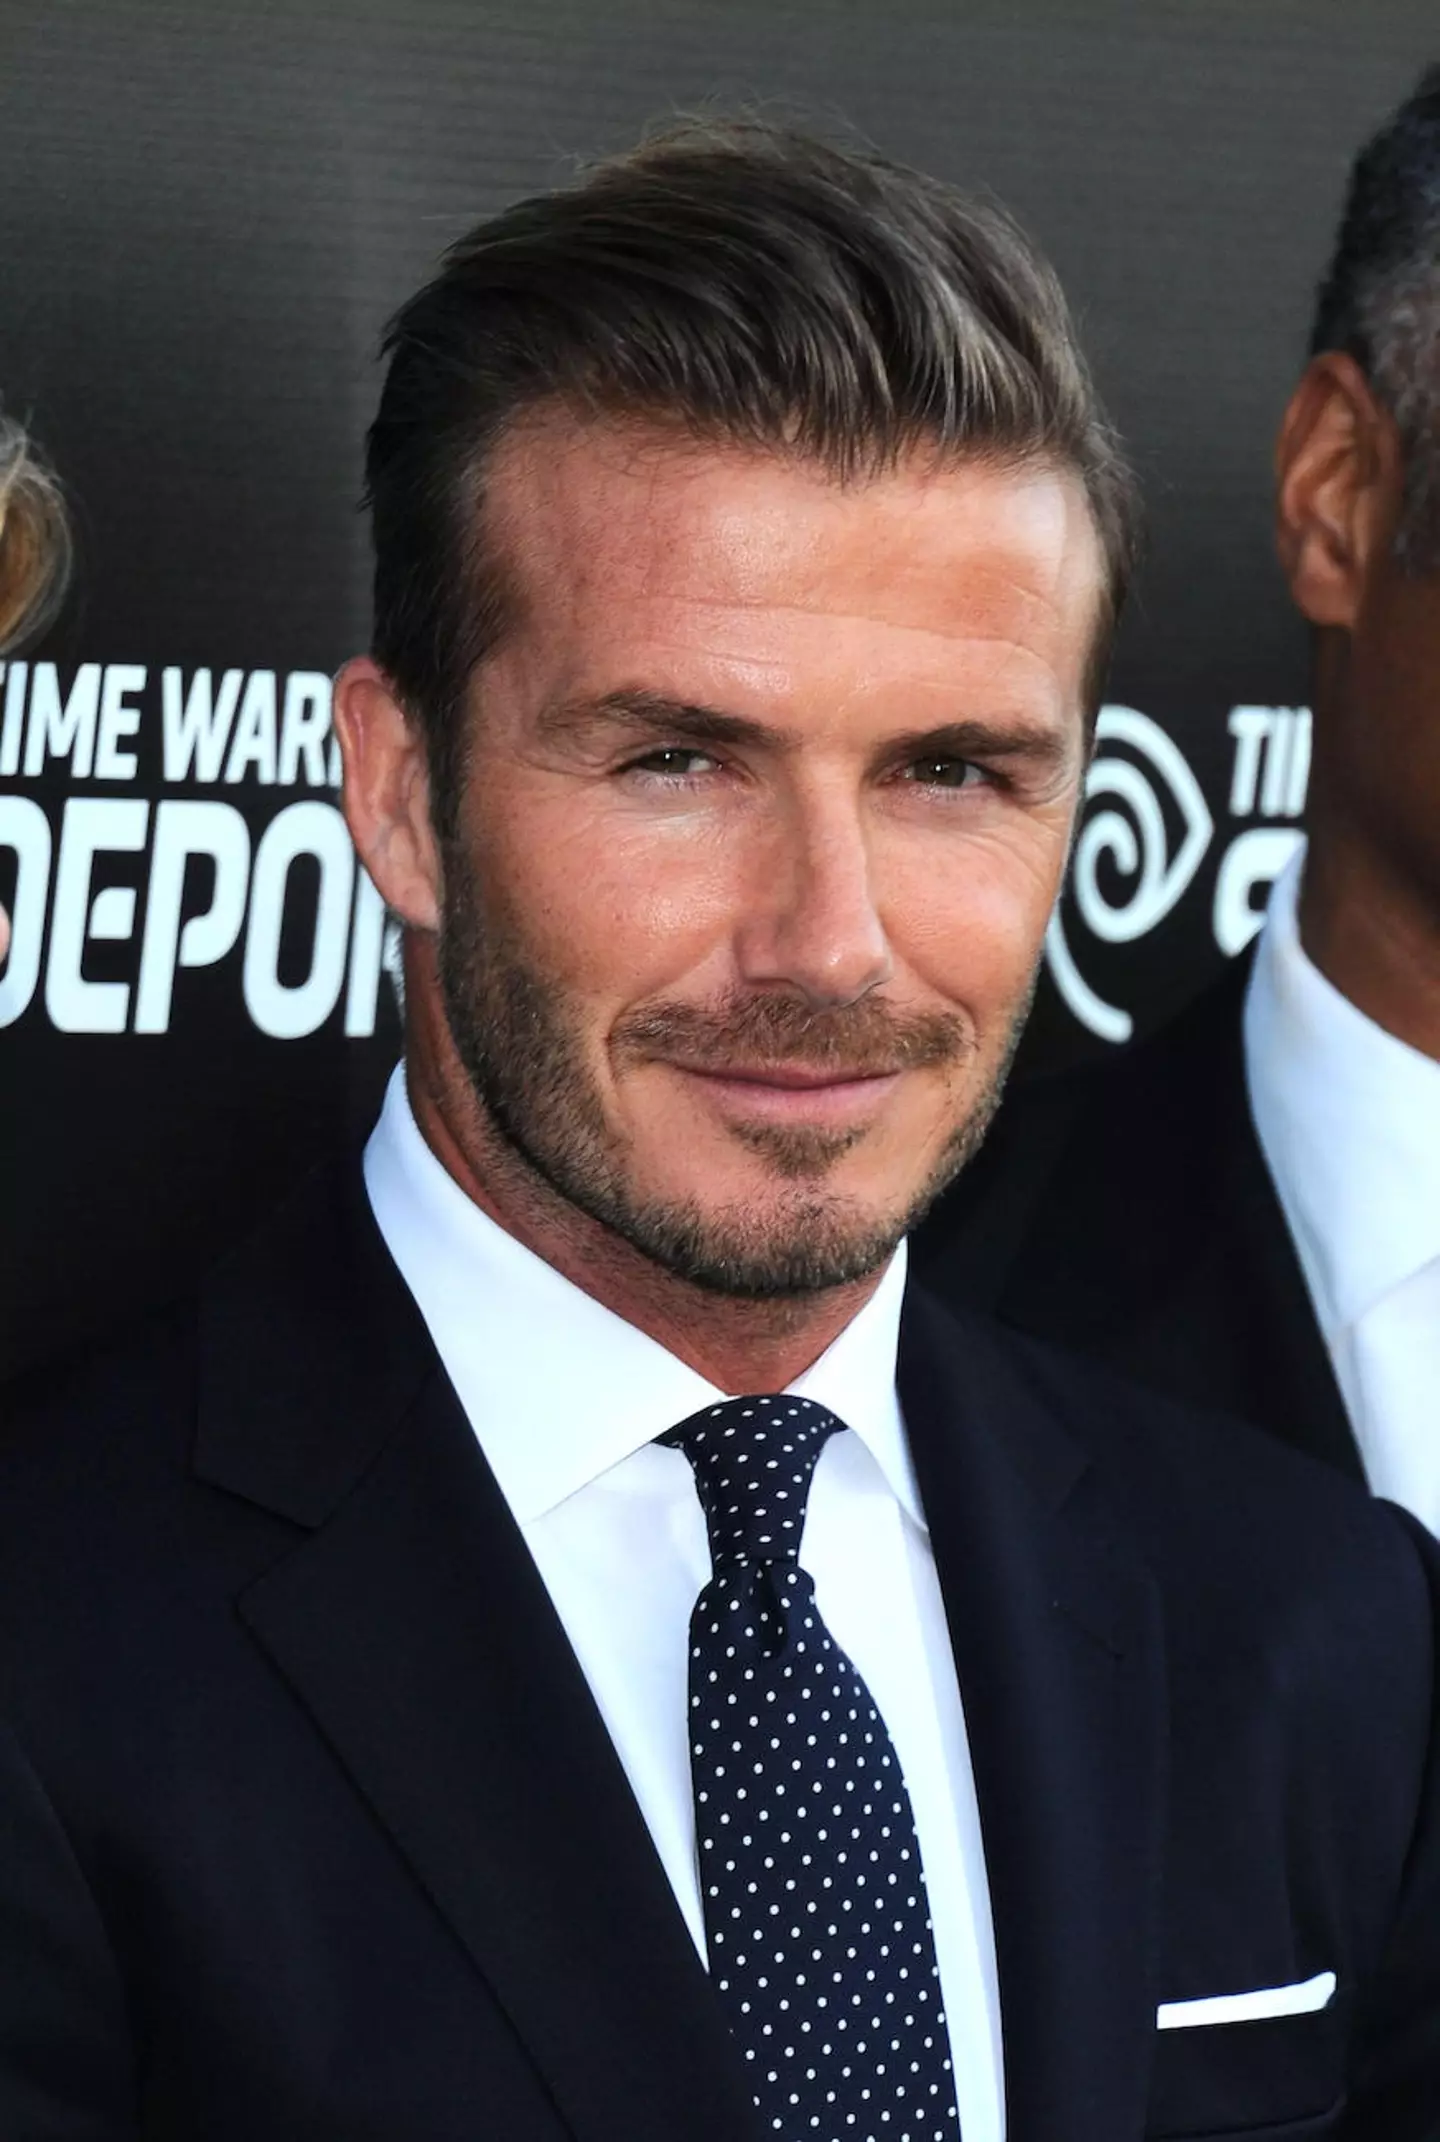 David Beckham reportedly signed a deal to be an ambassador for the World Cup in Qatar.